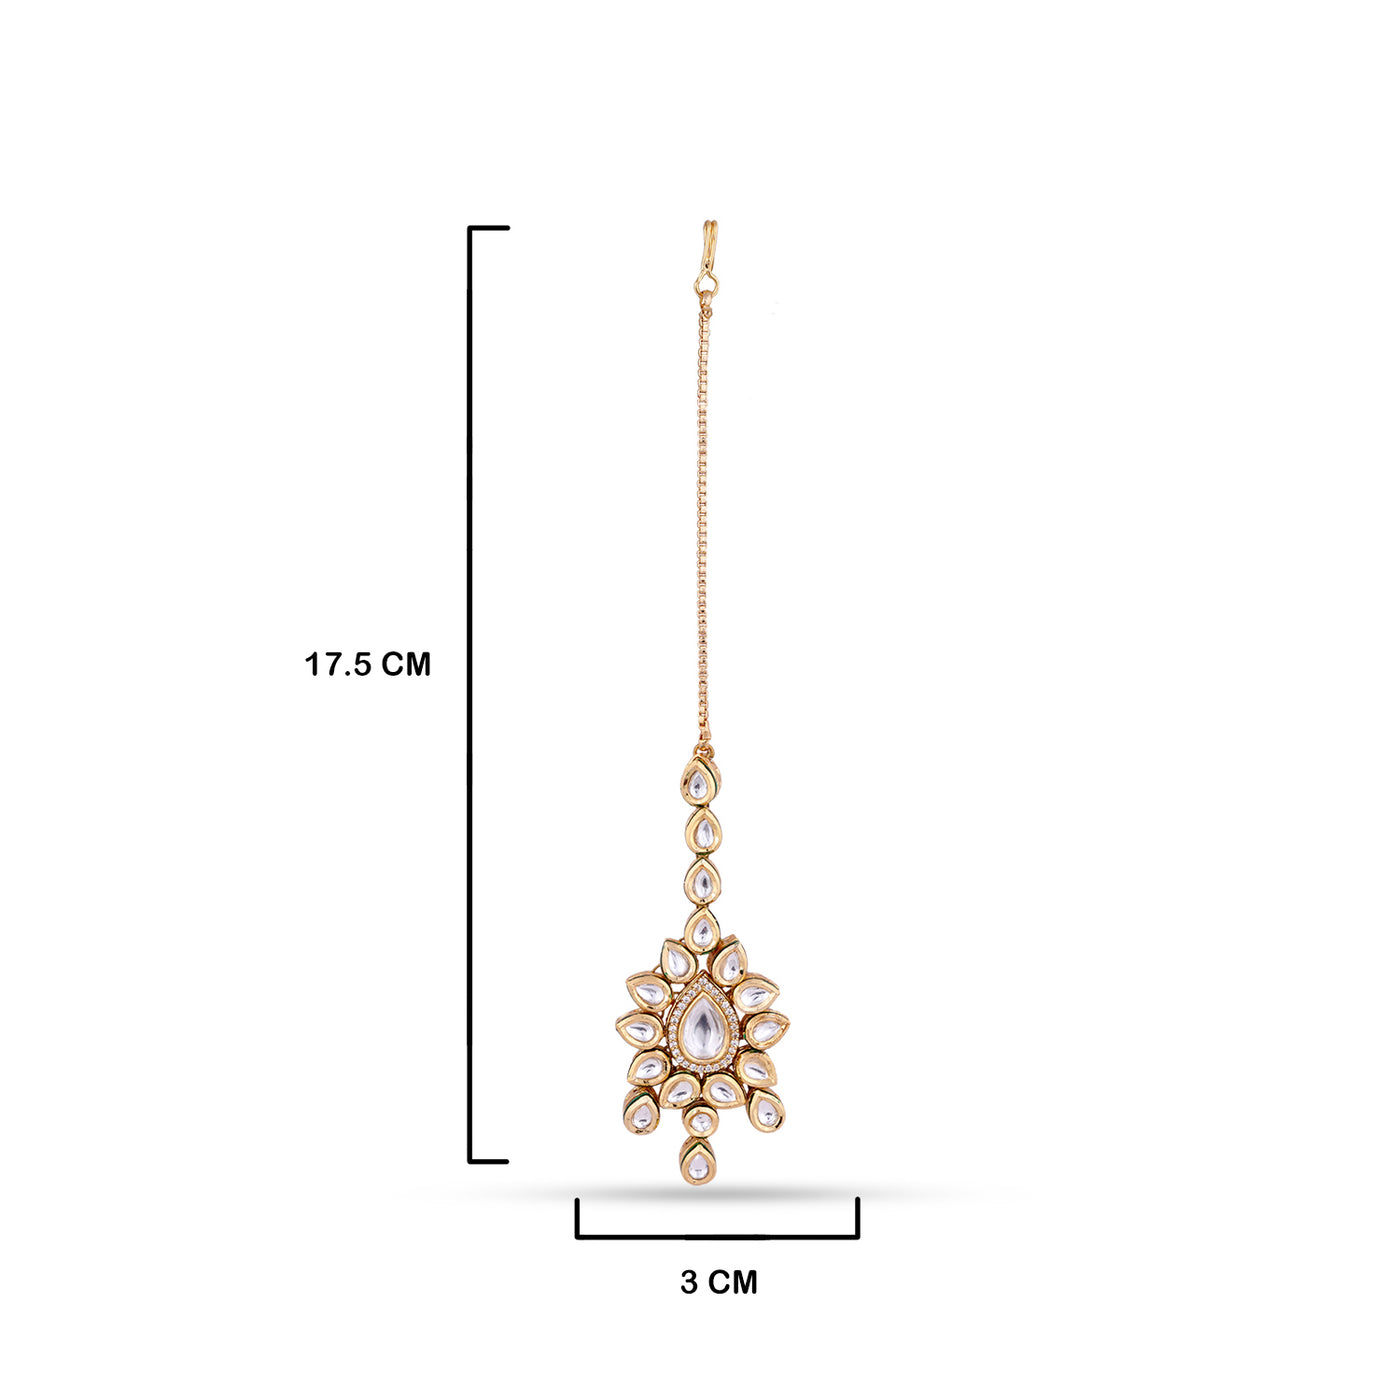 Classic Kundan Studded Maang Tikka with measurements in cm. 17.5cm by 3cm.